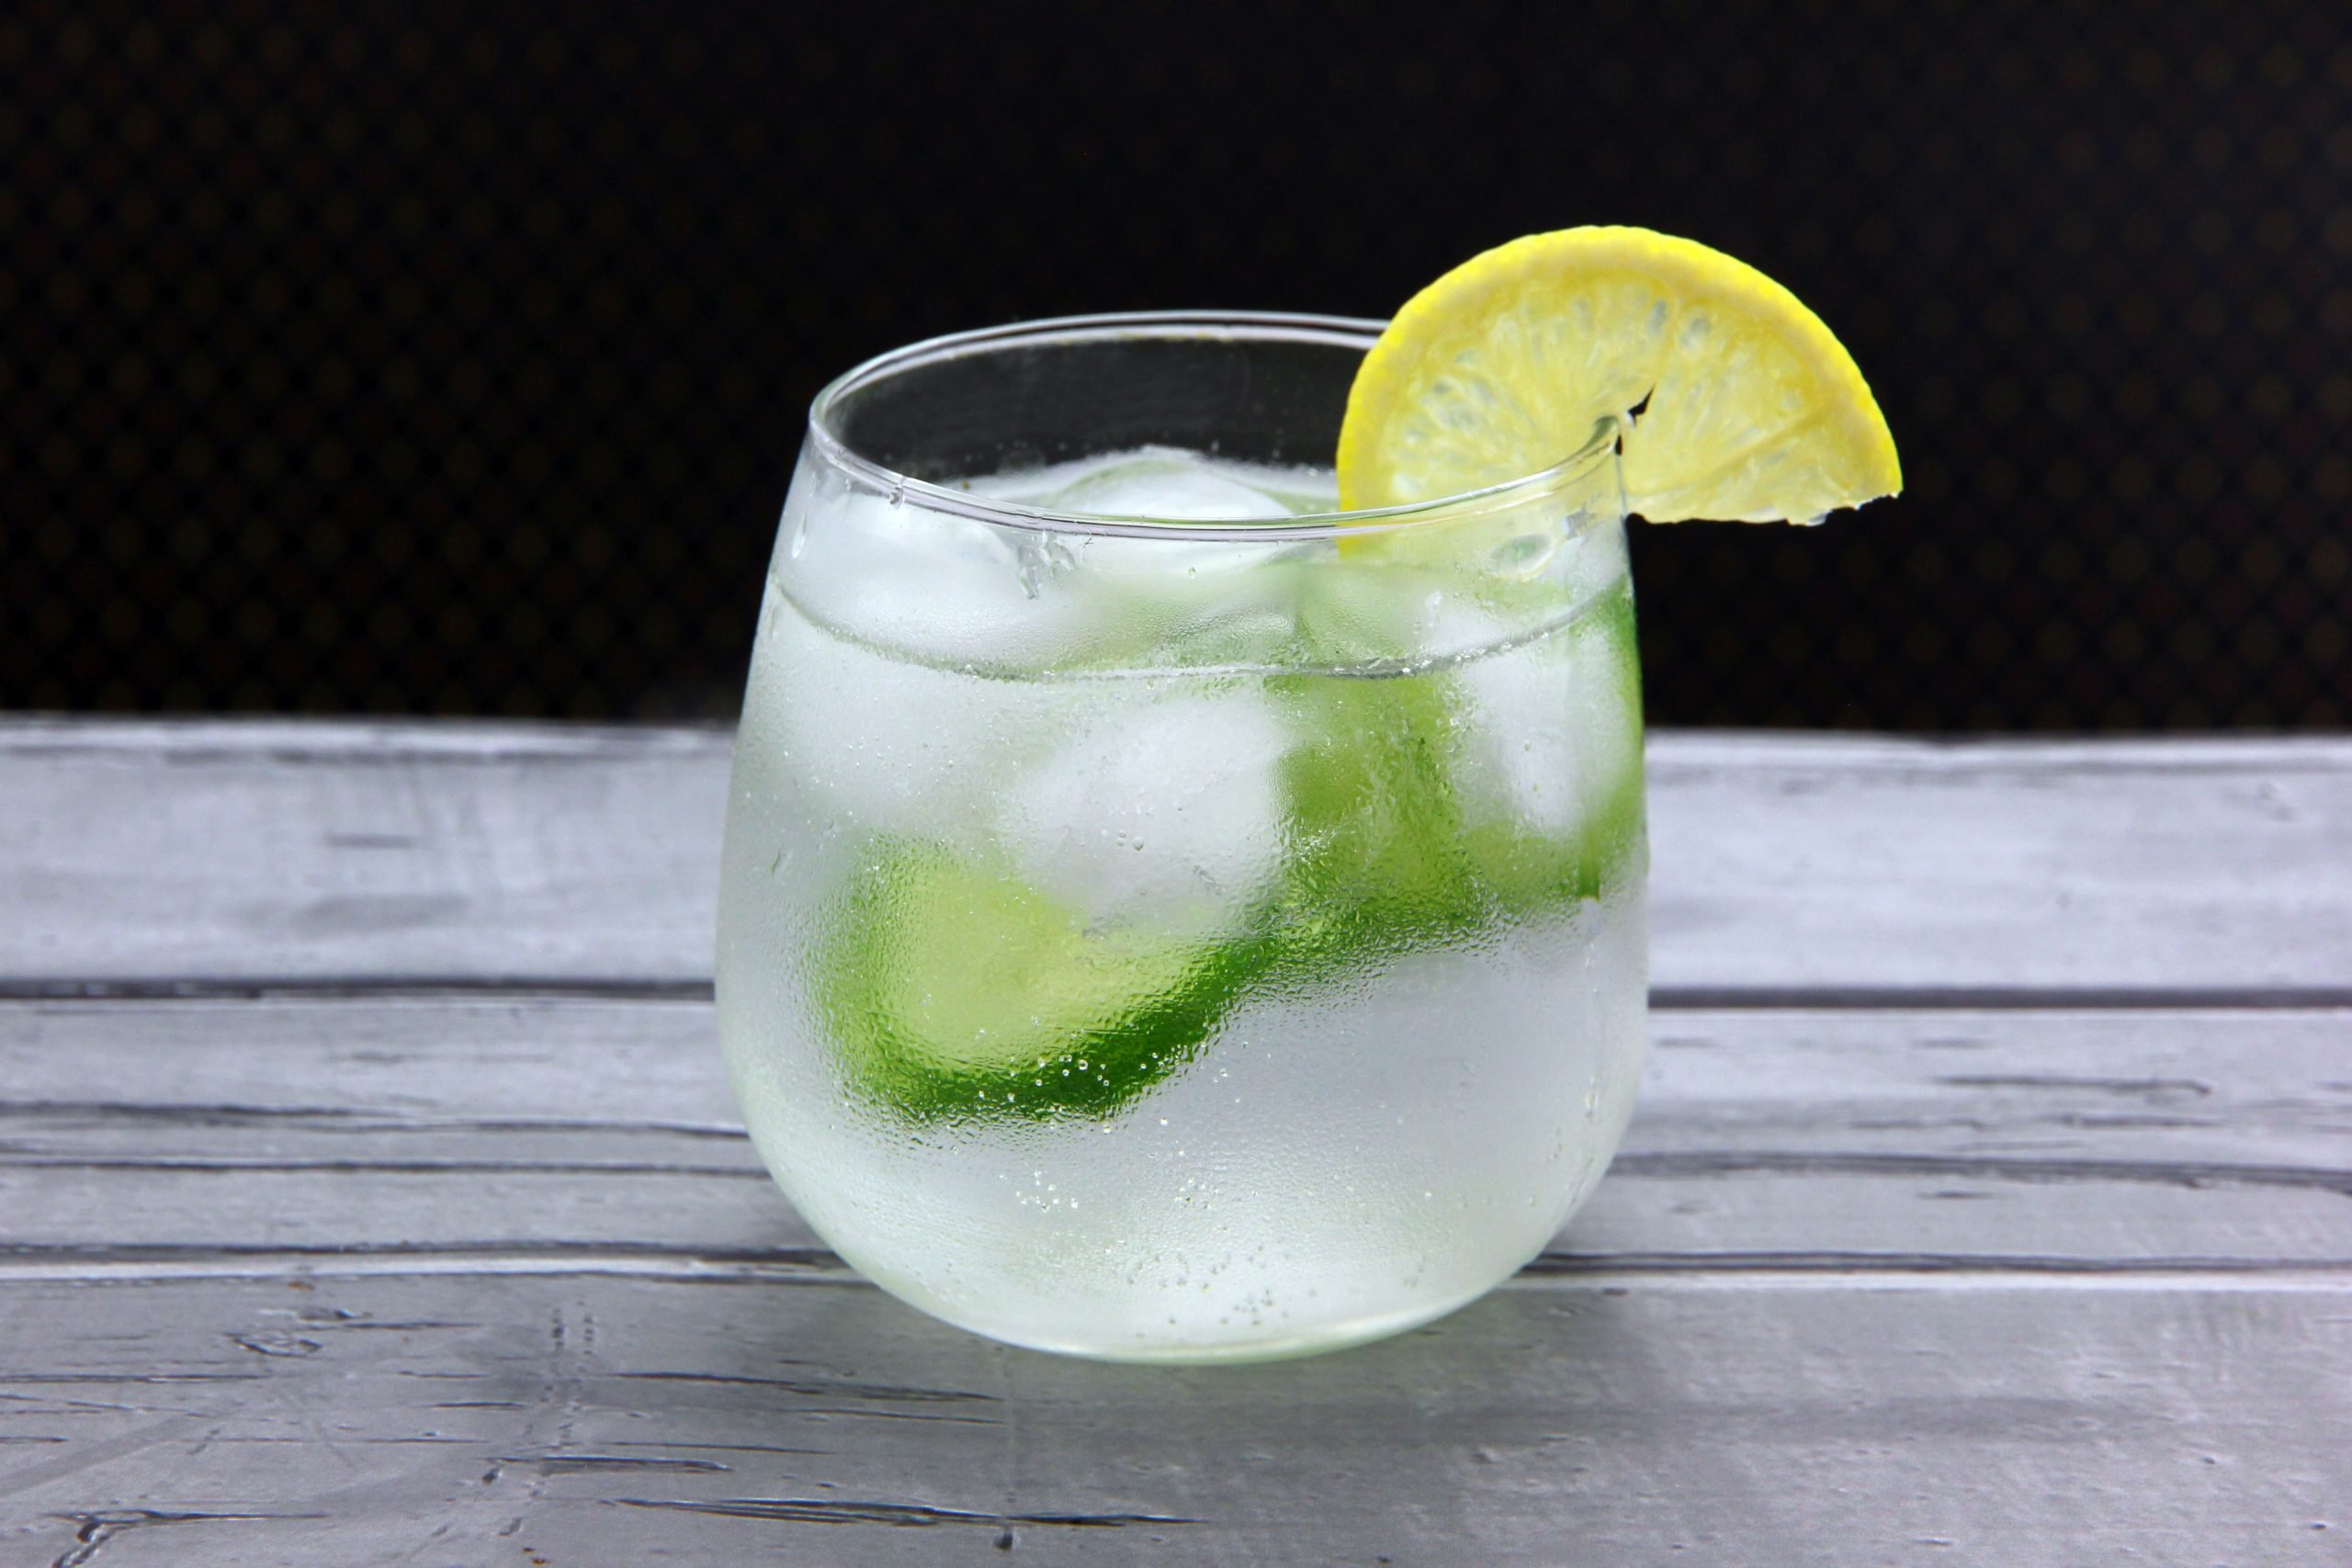 How to Make Gin and Tonic: 12 Steps (with Pictures)